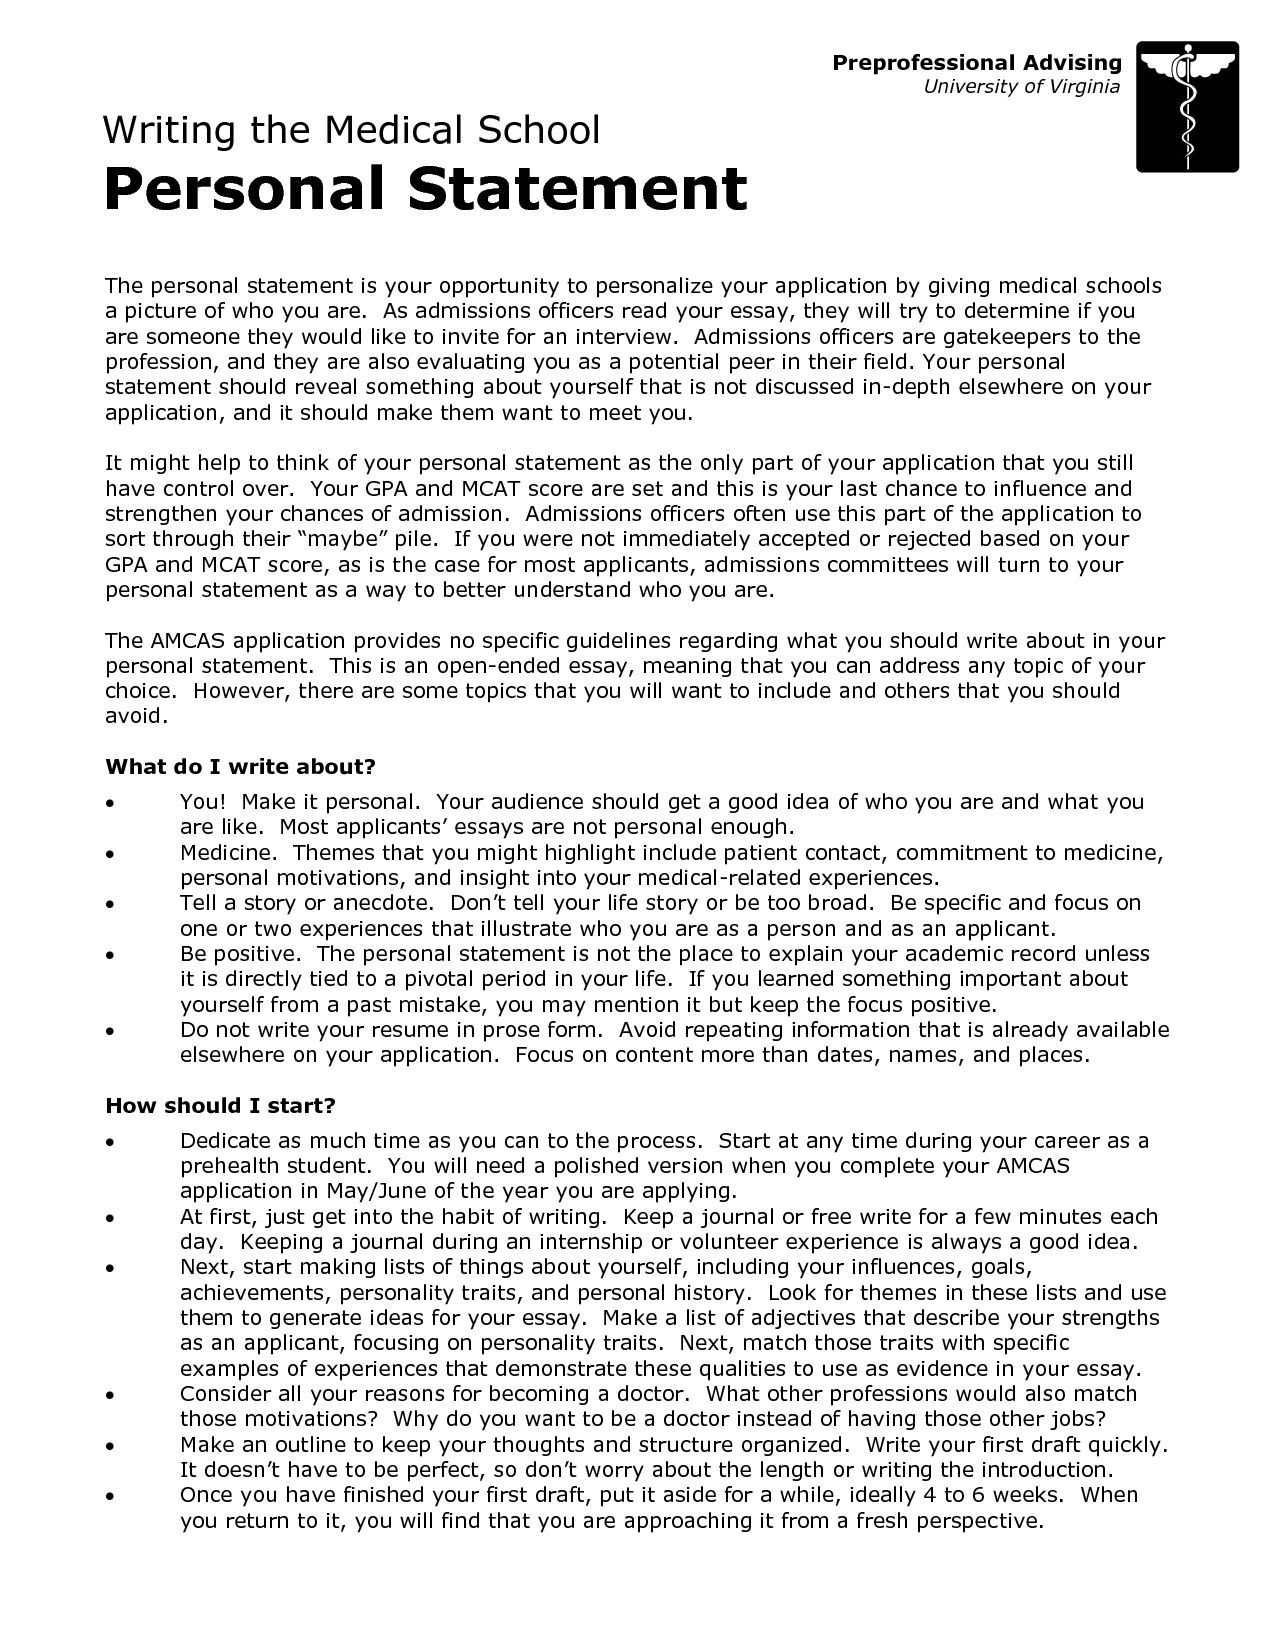 Help with a personal statement